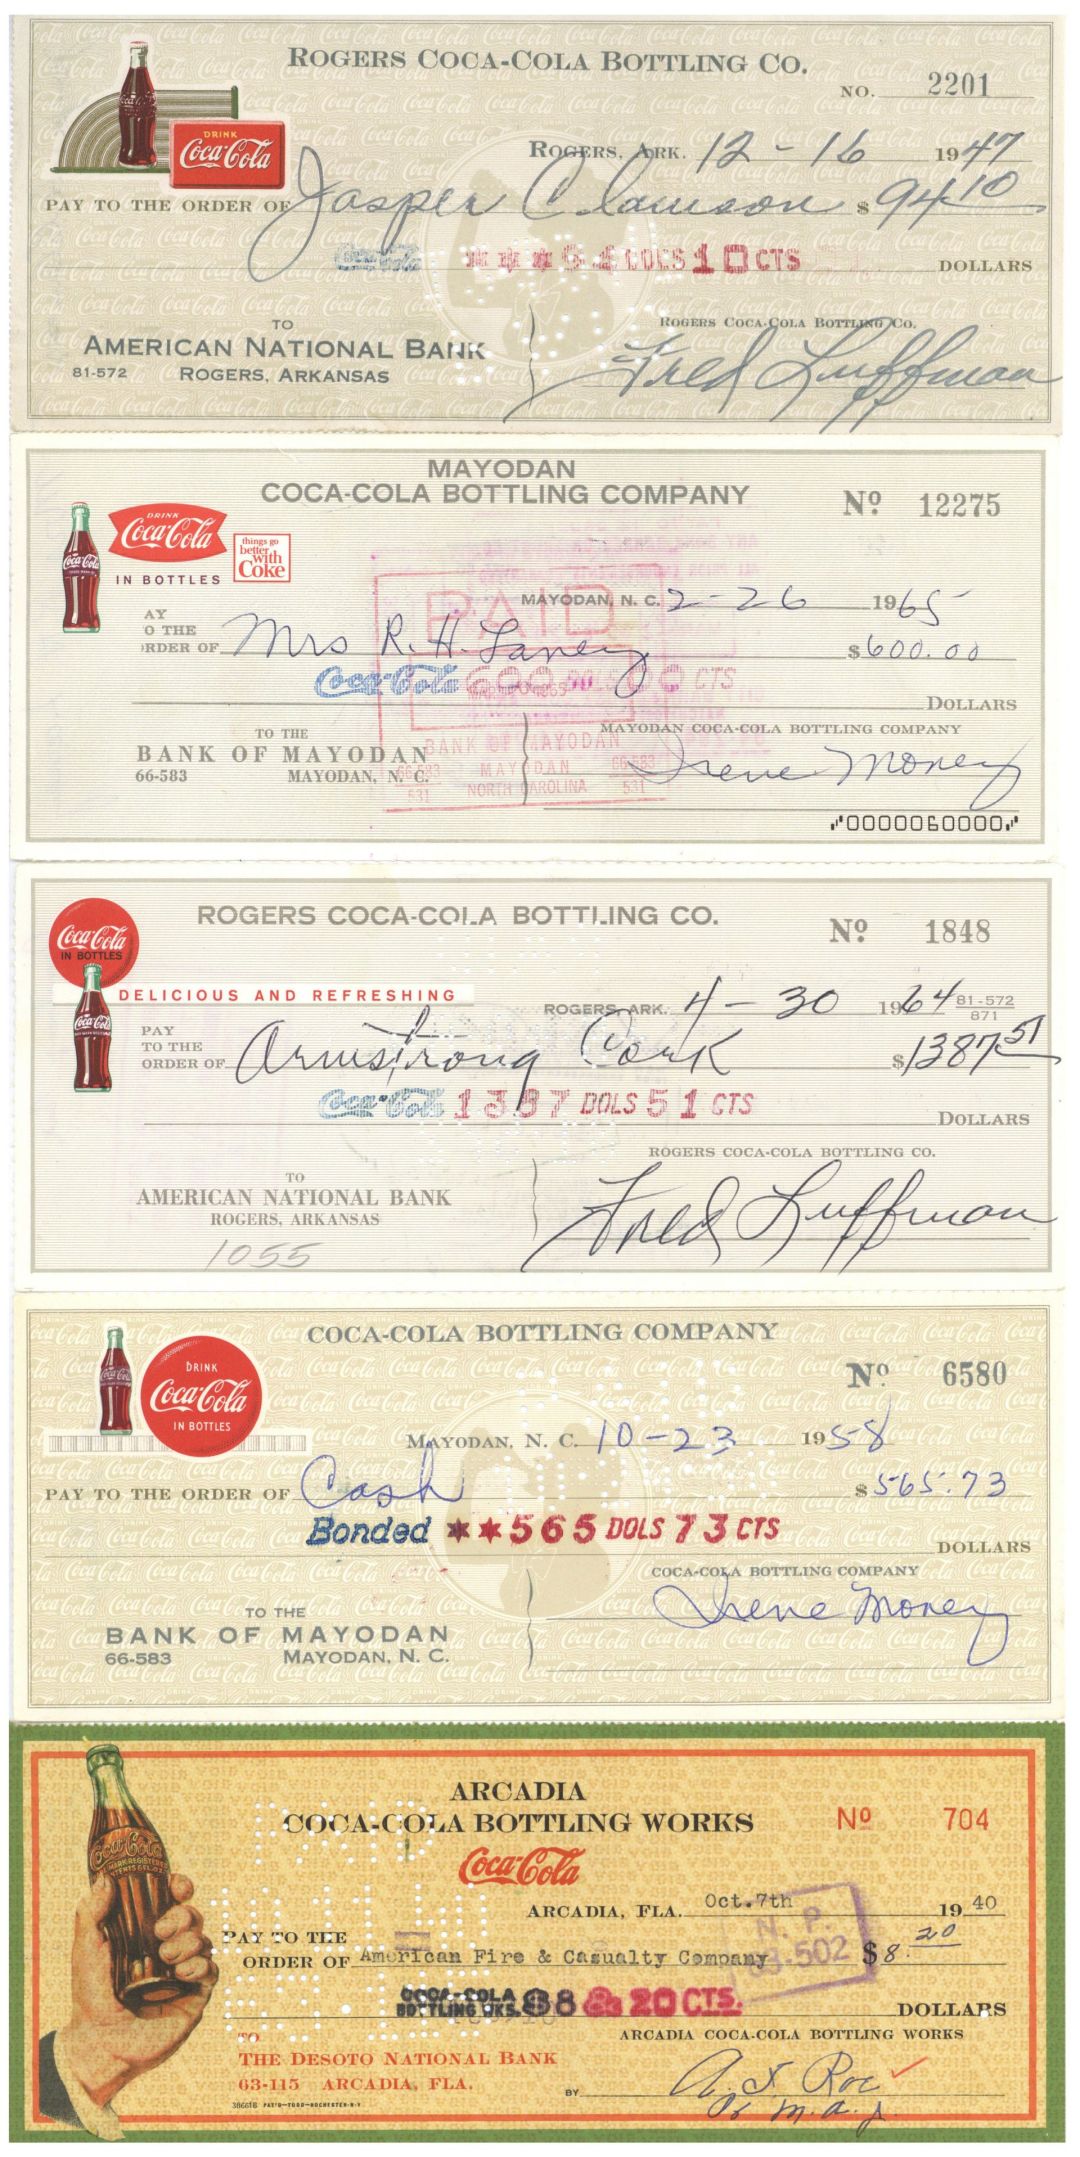 Coca-Cola Bottling Co. Collection of Five Checks (Coke) - 1940's-1970's dated Group of 5 Checks